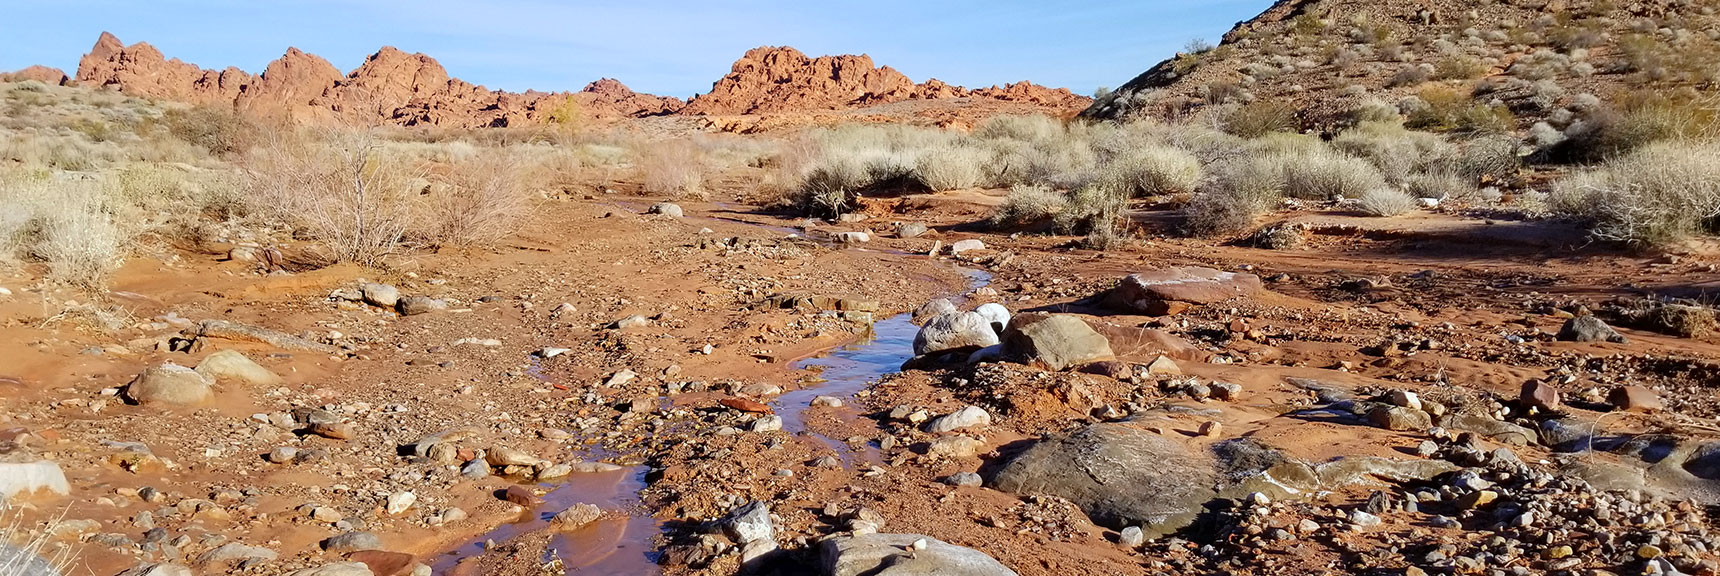 Stream Often Appears Then Disappears Into the Sand on Charlie's Spring Trail, Valley of Fire State Park, Nevada